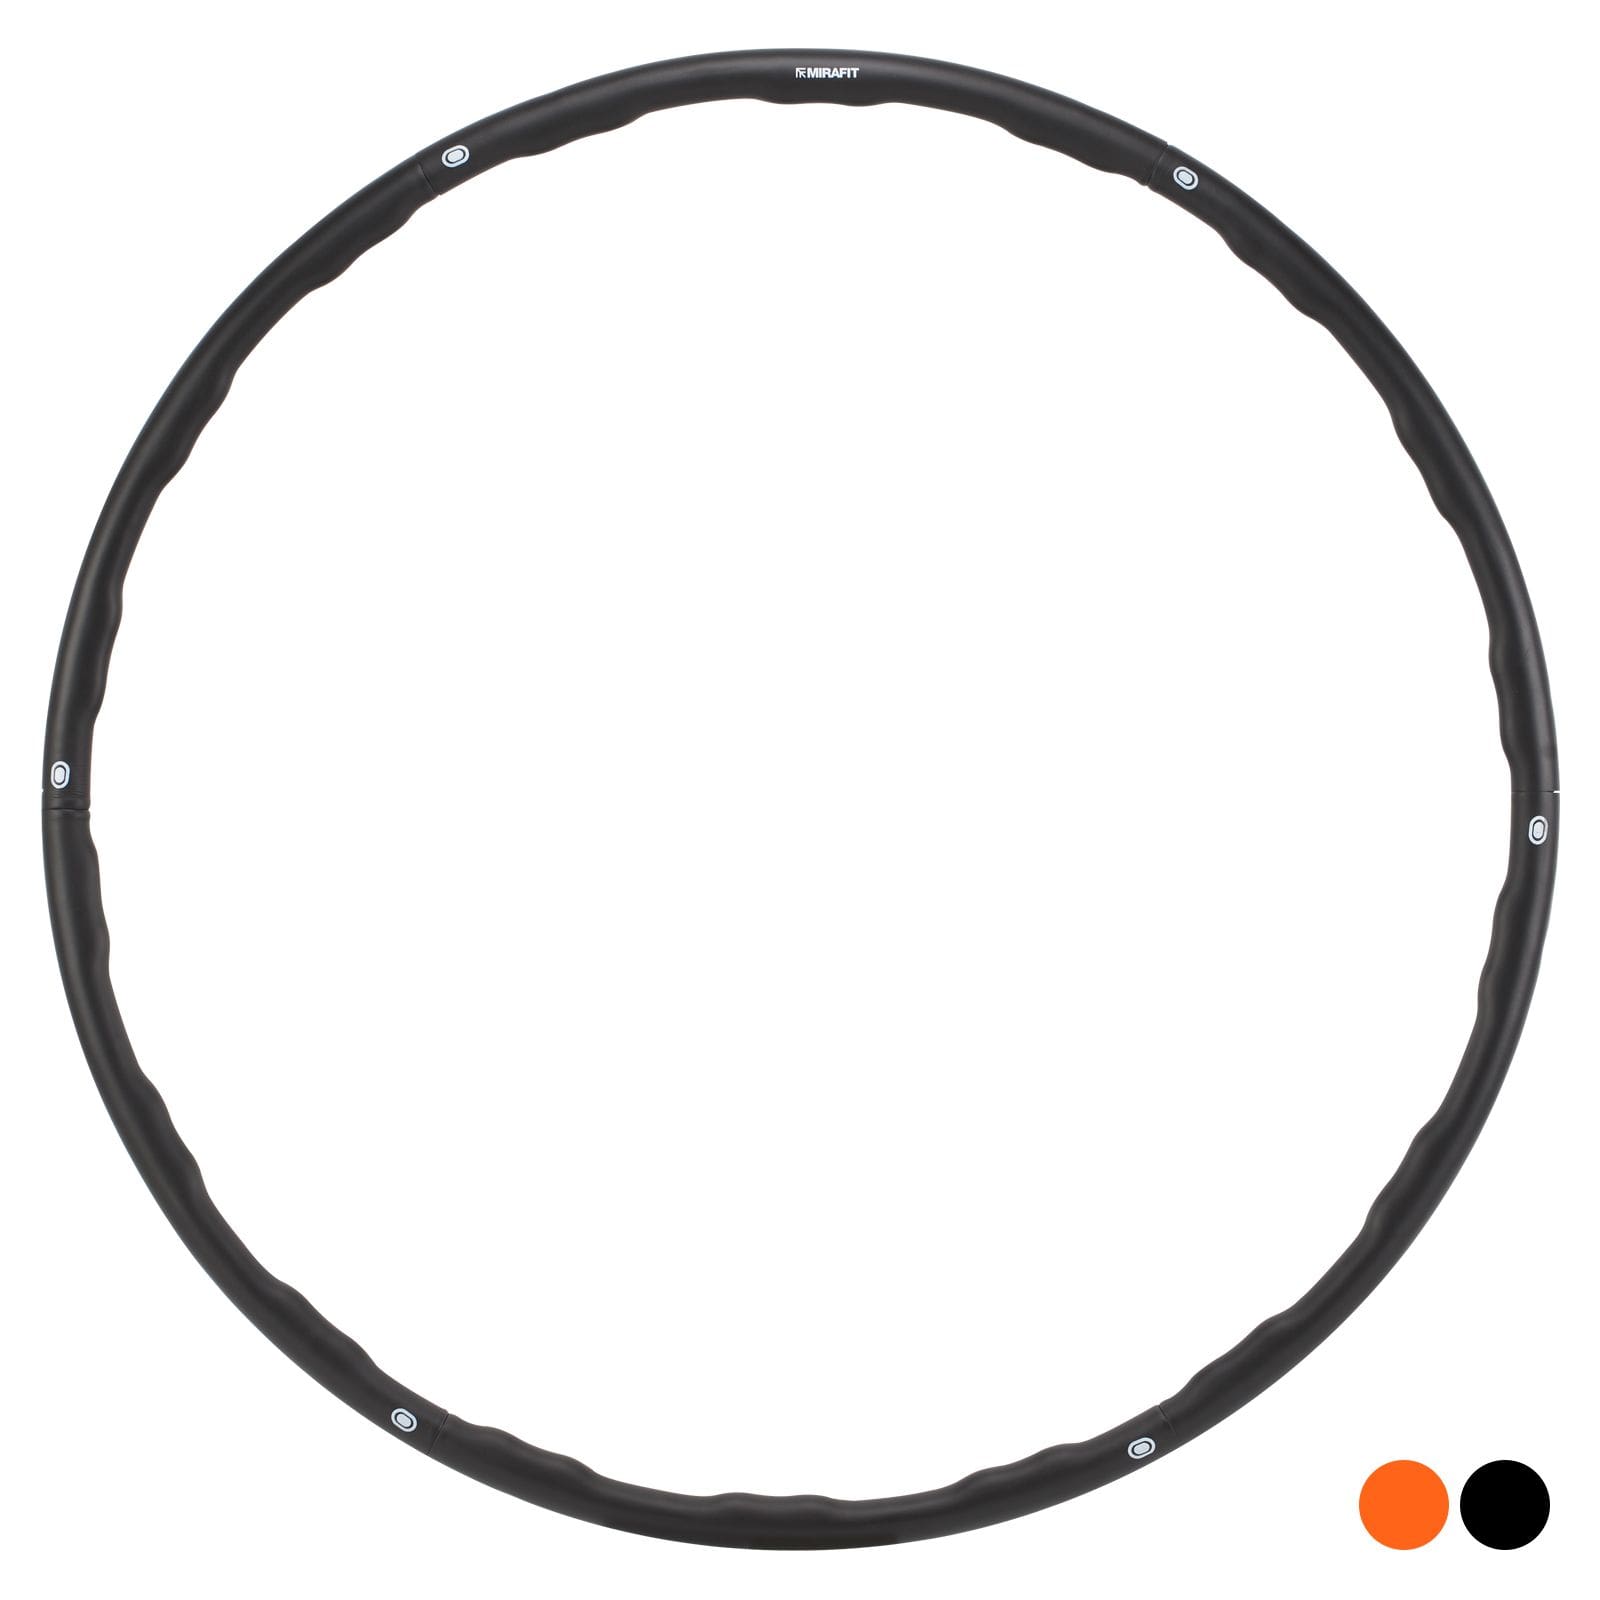 mirafit 1.2kg ridged weighted fitness hula hoop Review